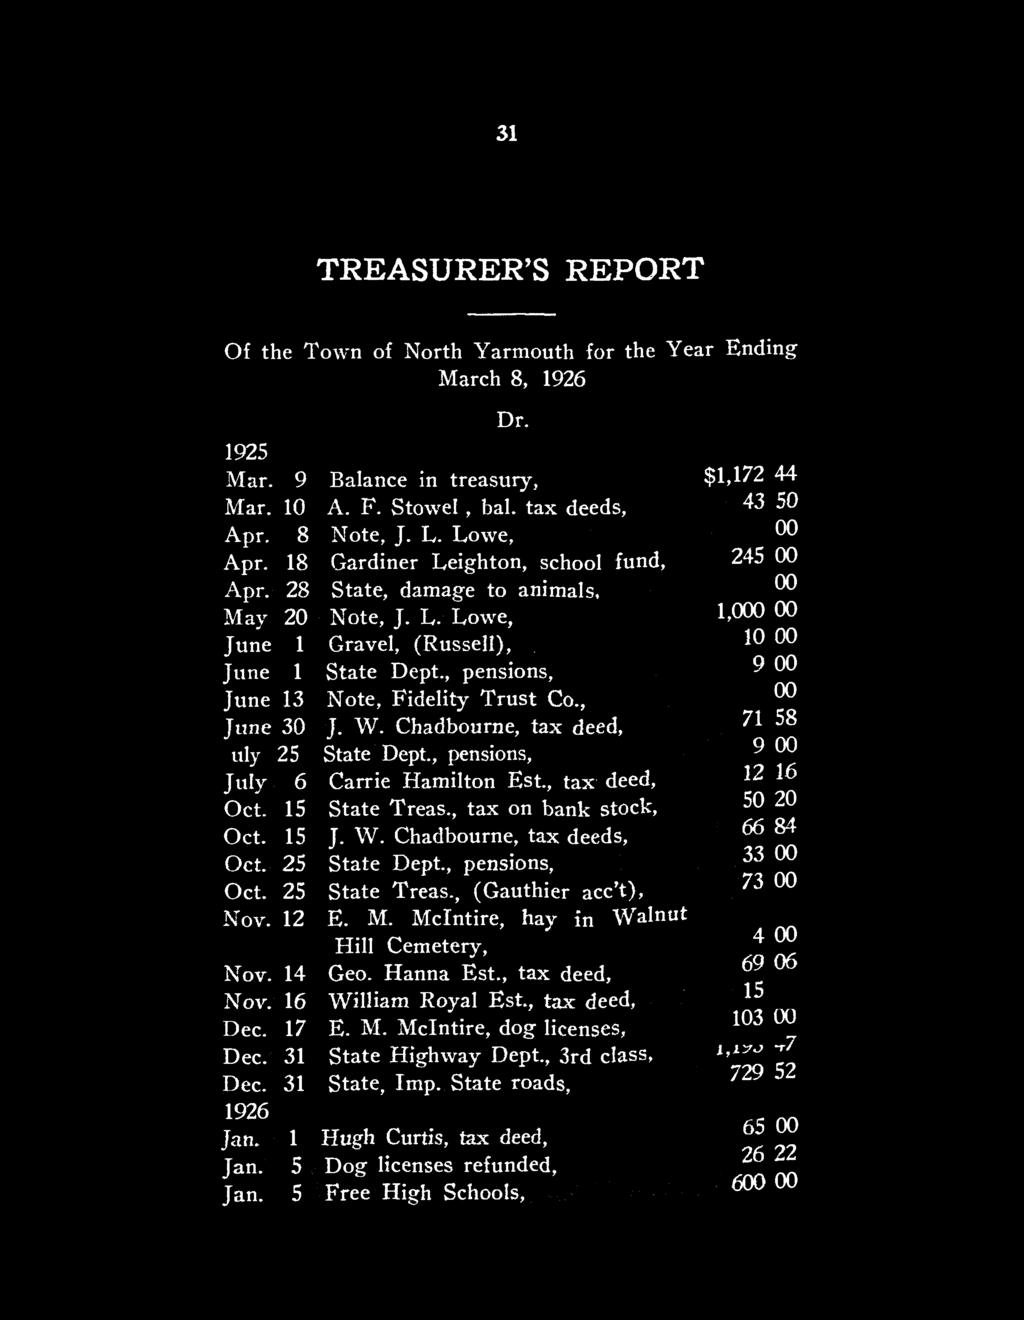 31 TREASURER'S REPORT Of the Town of North Yarmouth for the Year Ending March 8, 1926 Dr. 1925 Mar. 9 Balance in treasury, $1,172 44 Mar. 10 A. F. Stowell, bal. tax deeds, 143 50 Apr. 8 Note, J. L.